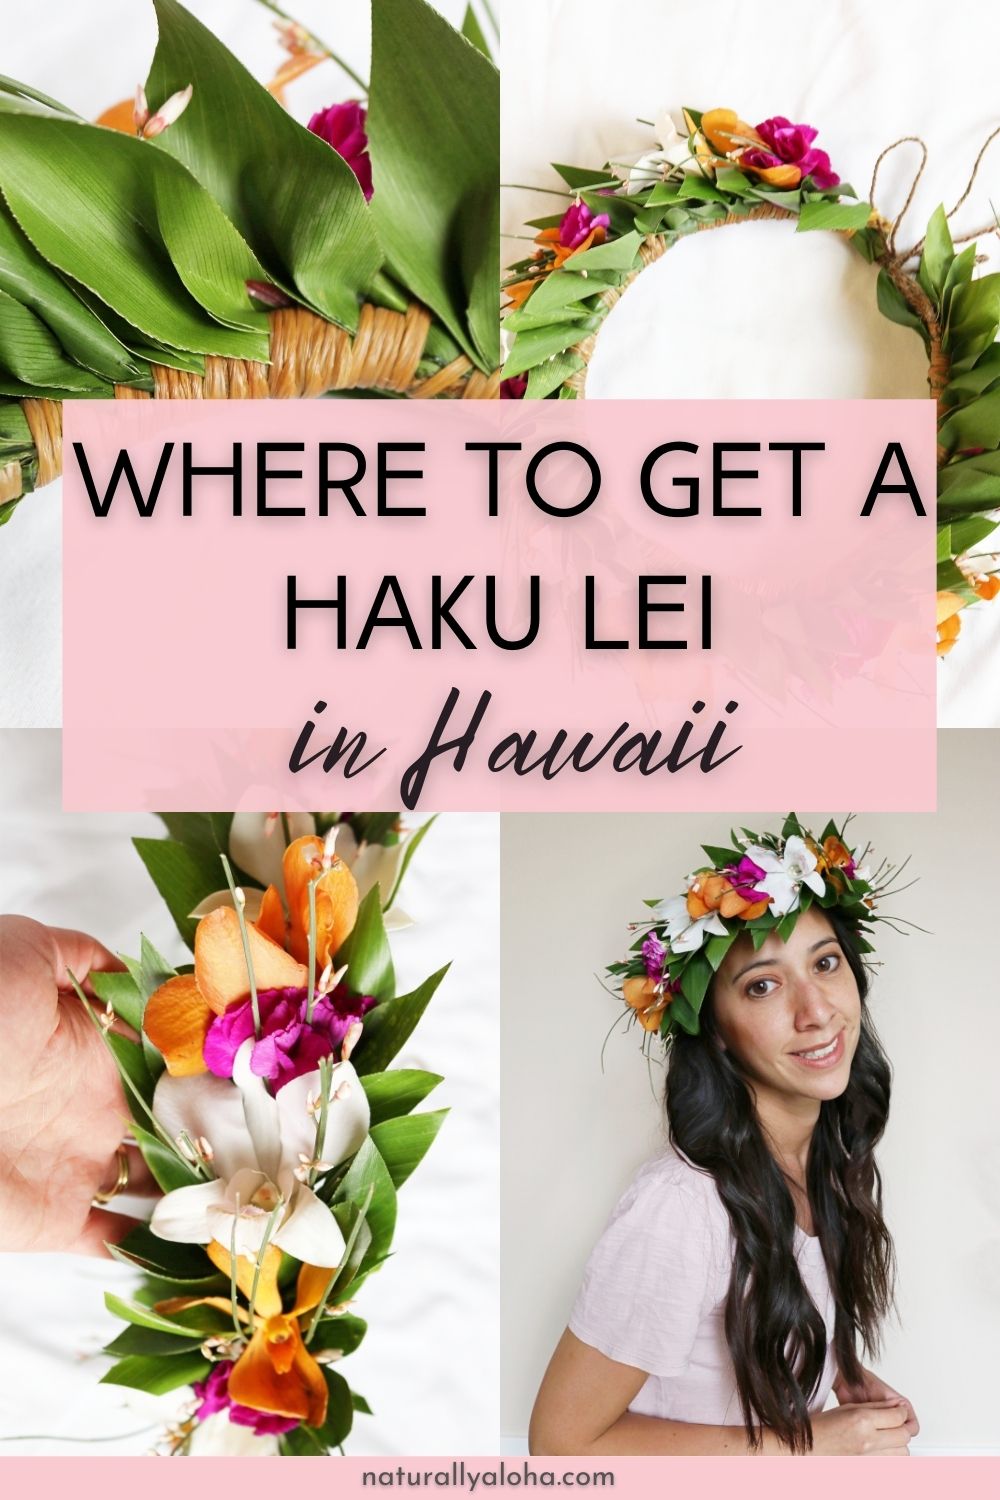 Everything You Need to Know About Getting a Beautiful Haku Lei